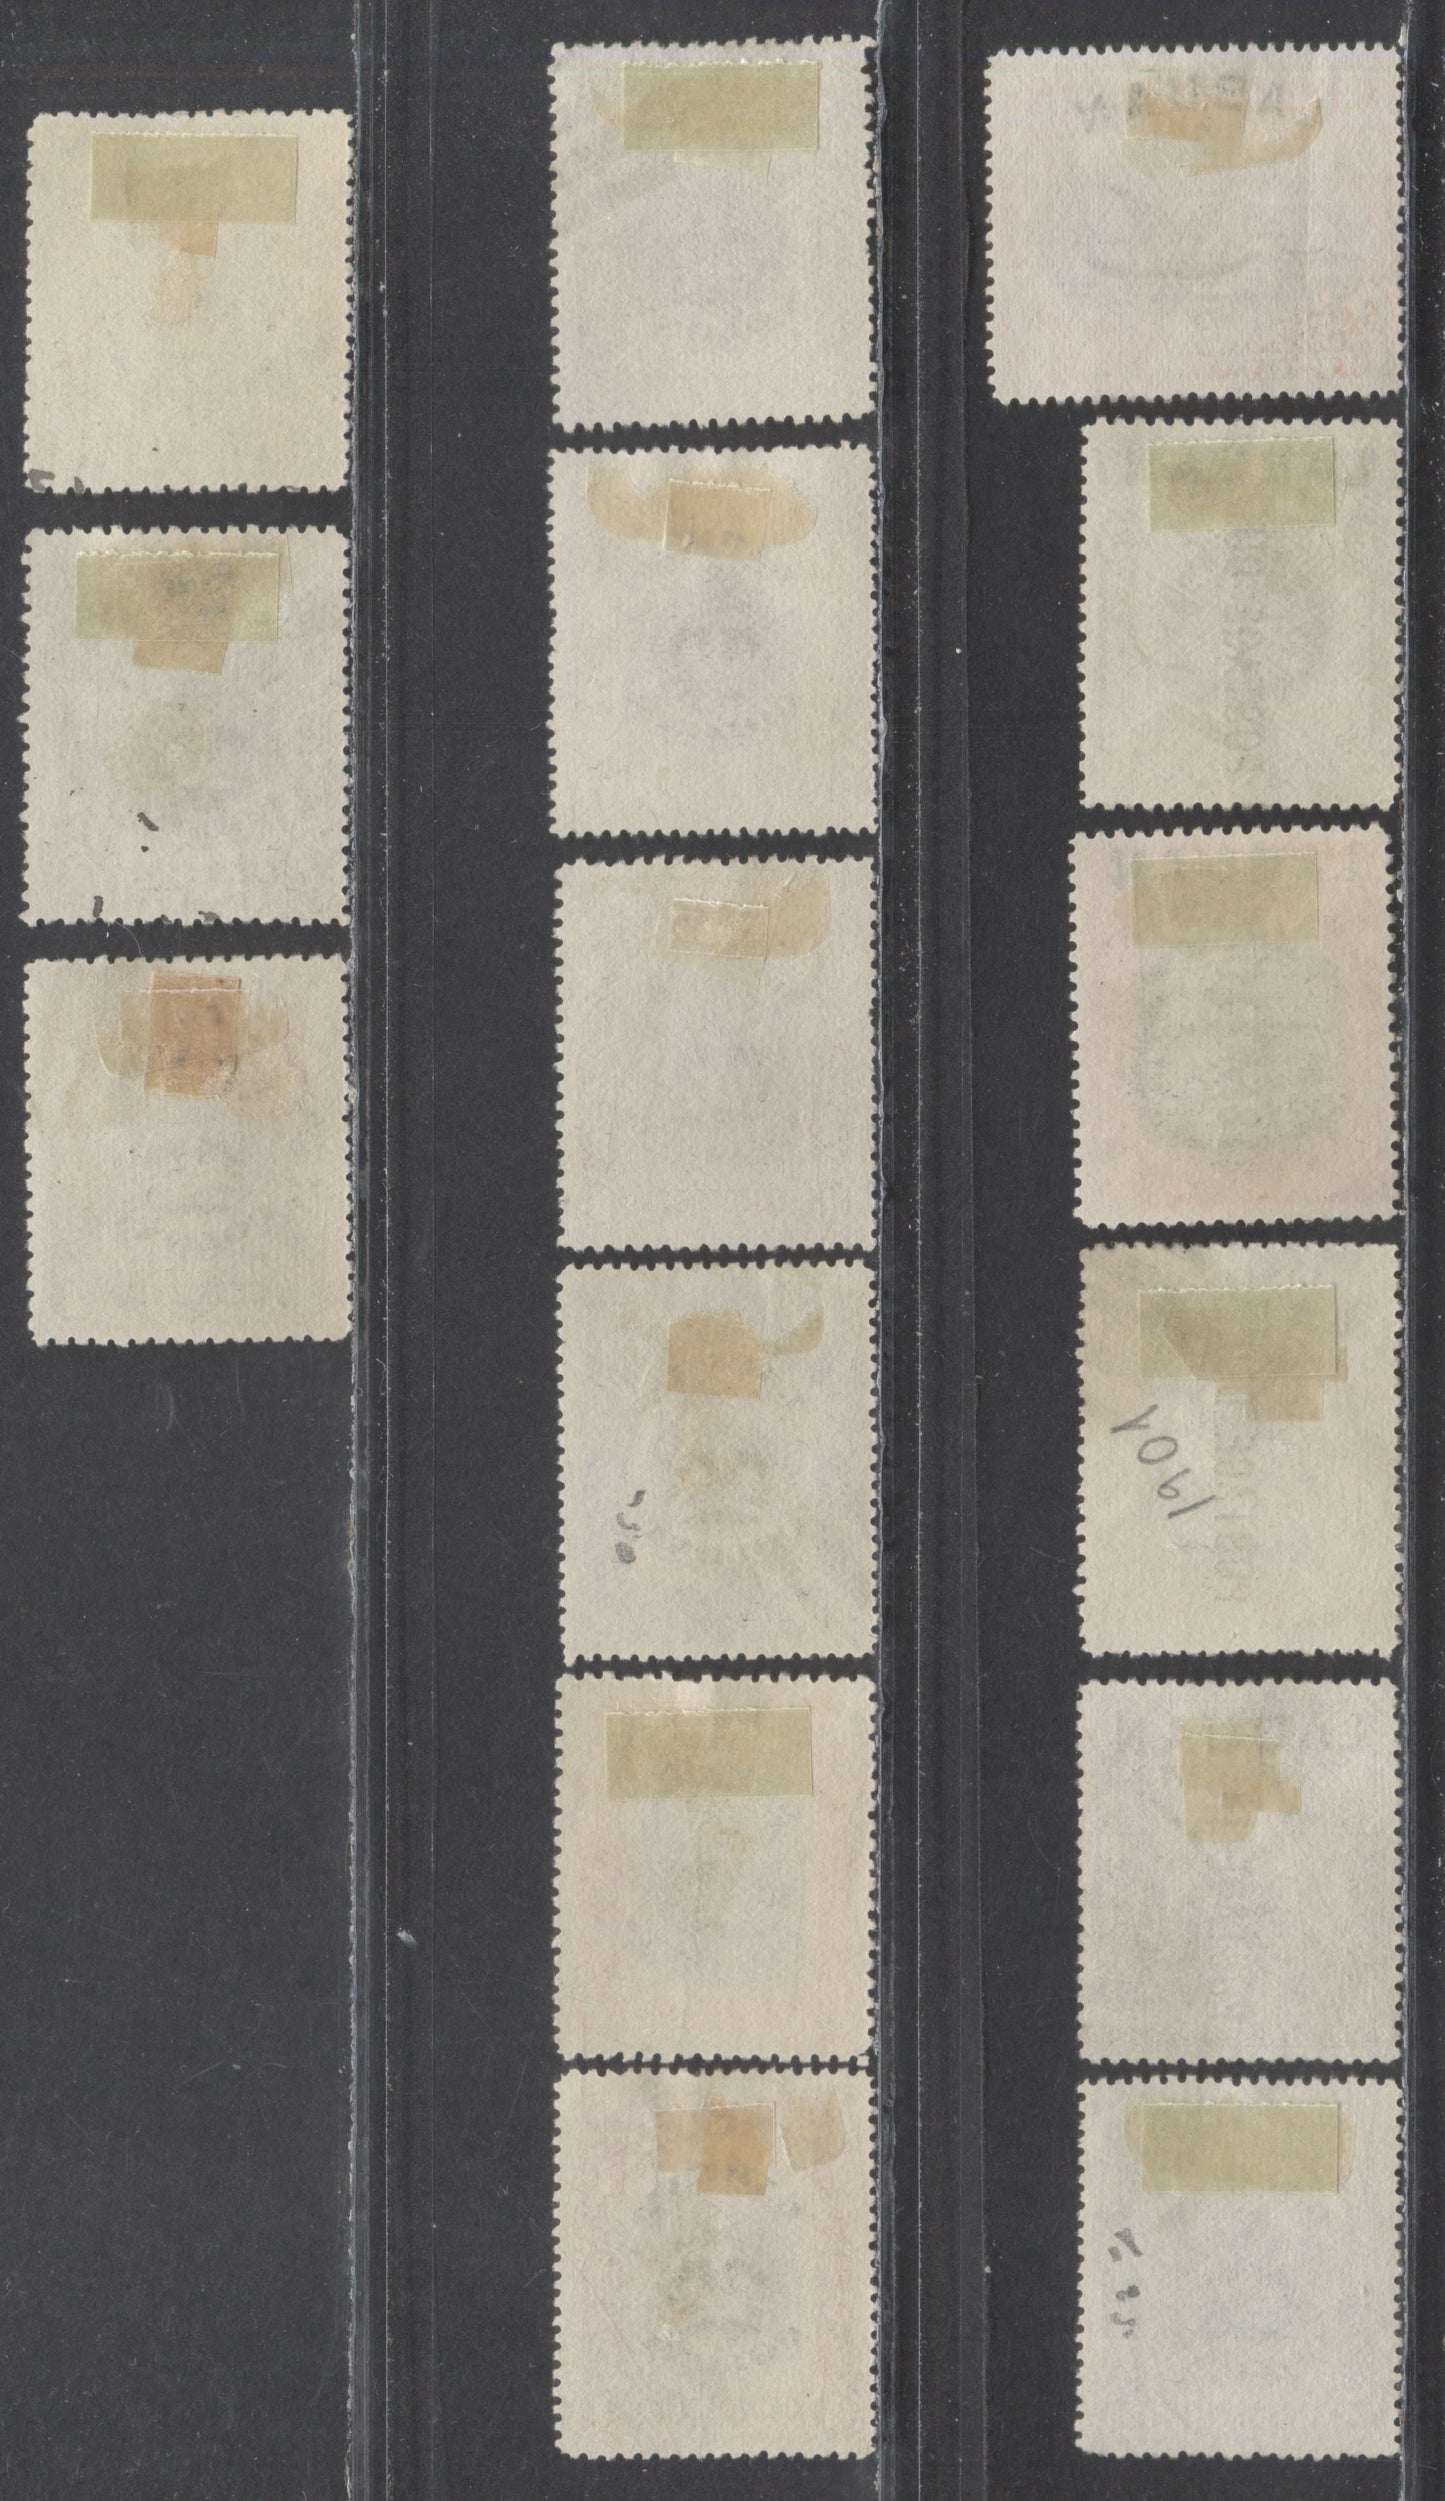 Lot 439 Labuan SC#99a/J6e 1901-1903 Crown Definitives & Postage Dues, 14 Fine/Very Fine Used Singles, Click on Listing to See ALL Pictures, 2022 Scott Classic Cat. $18.55 USD